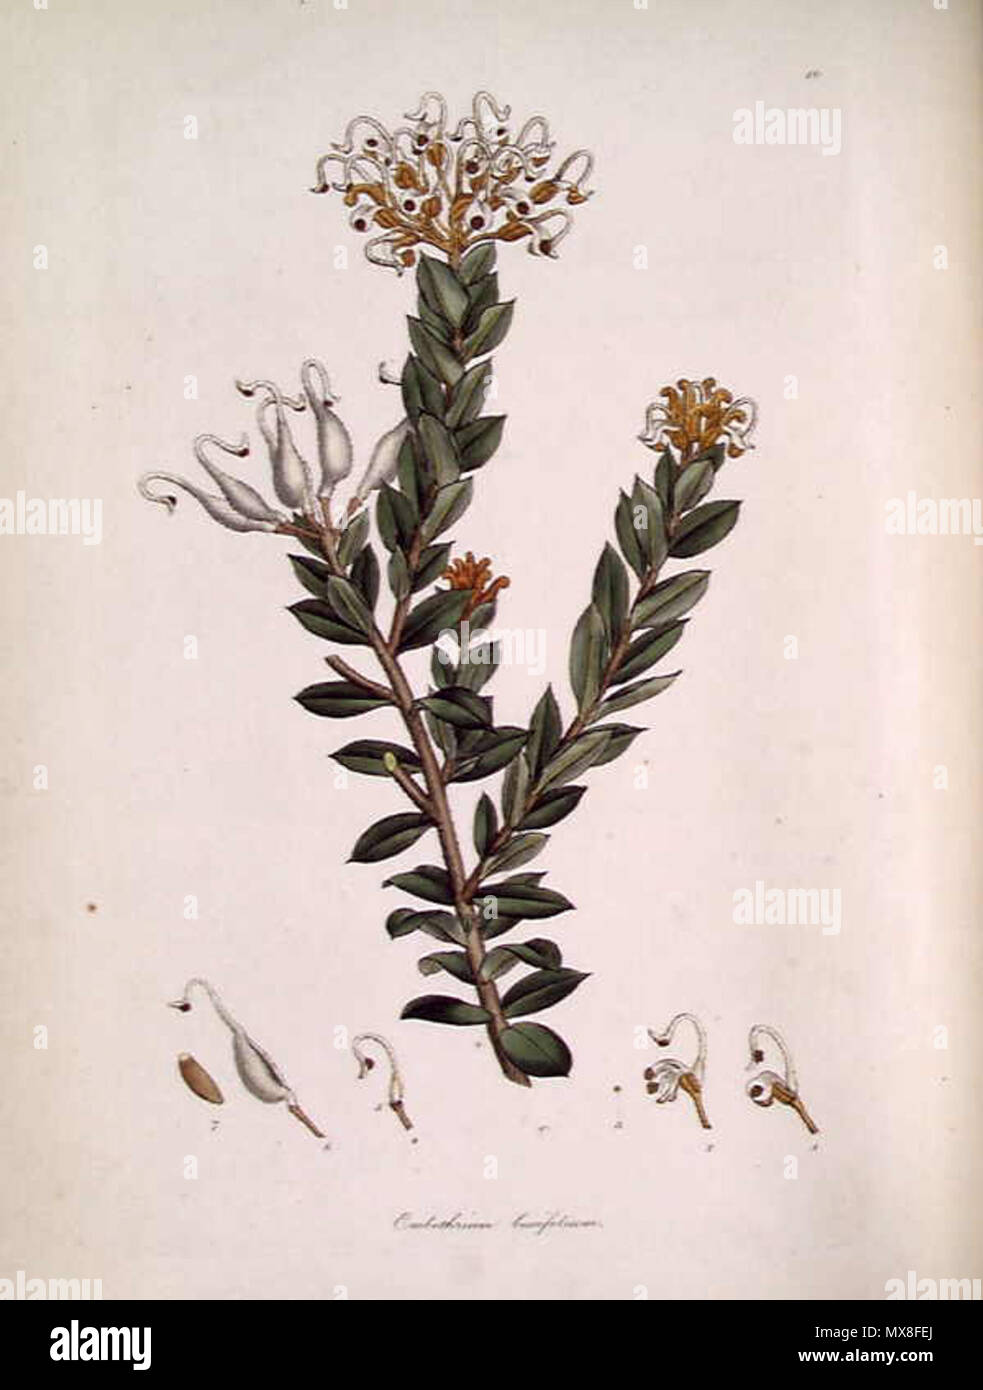 . This is an image of a print of a hand coloured engraving by James Sowerby (1757-1822), based on drawing nominally by John White but probably by the convict artist Thomas Watling. It appeared as Tab. X in James Edward Smith's 1793 A Specimen of the Botany of New Holland. The plant depicted is Grevillea buxifolia (Sm.) but was titled Embothrium buxifolium. The accompanying text at the source of the digital image gives print : engraving with hand colouring ; plate mark 23.7 x 15.0 cm. on sheet 29.0 x 21.3 cm. Engraved on plate u.r.: 10. Title engraved on plate l.c. circa 1794. James Sowerby 185 Stock Photo